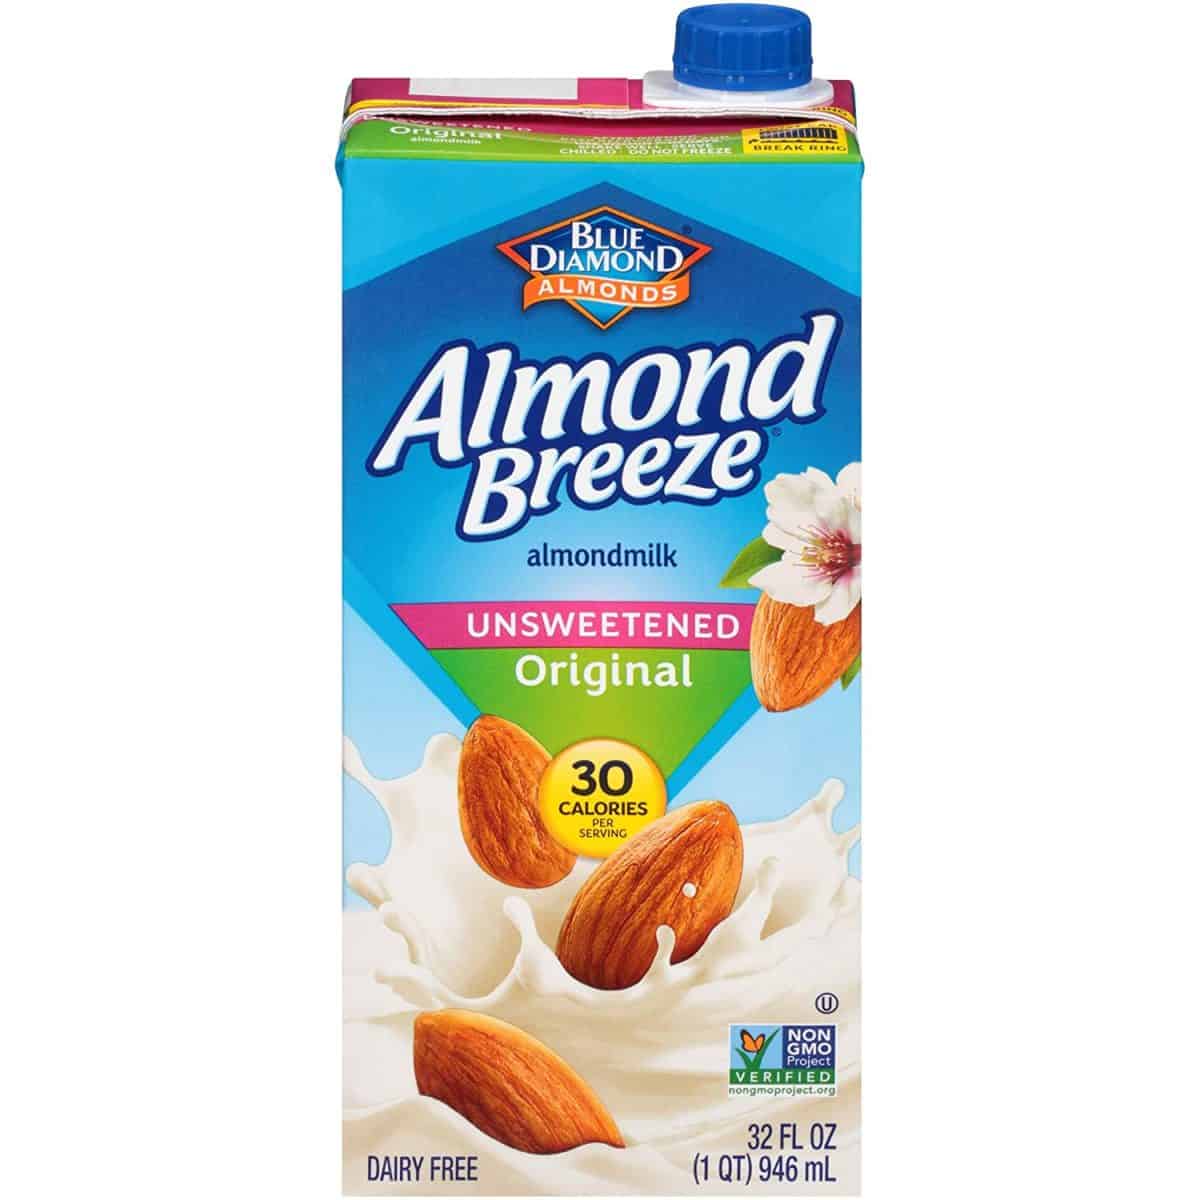 Almond milk as a good substitute for coconut milk